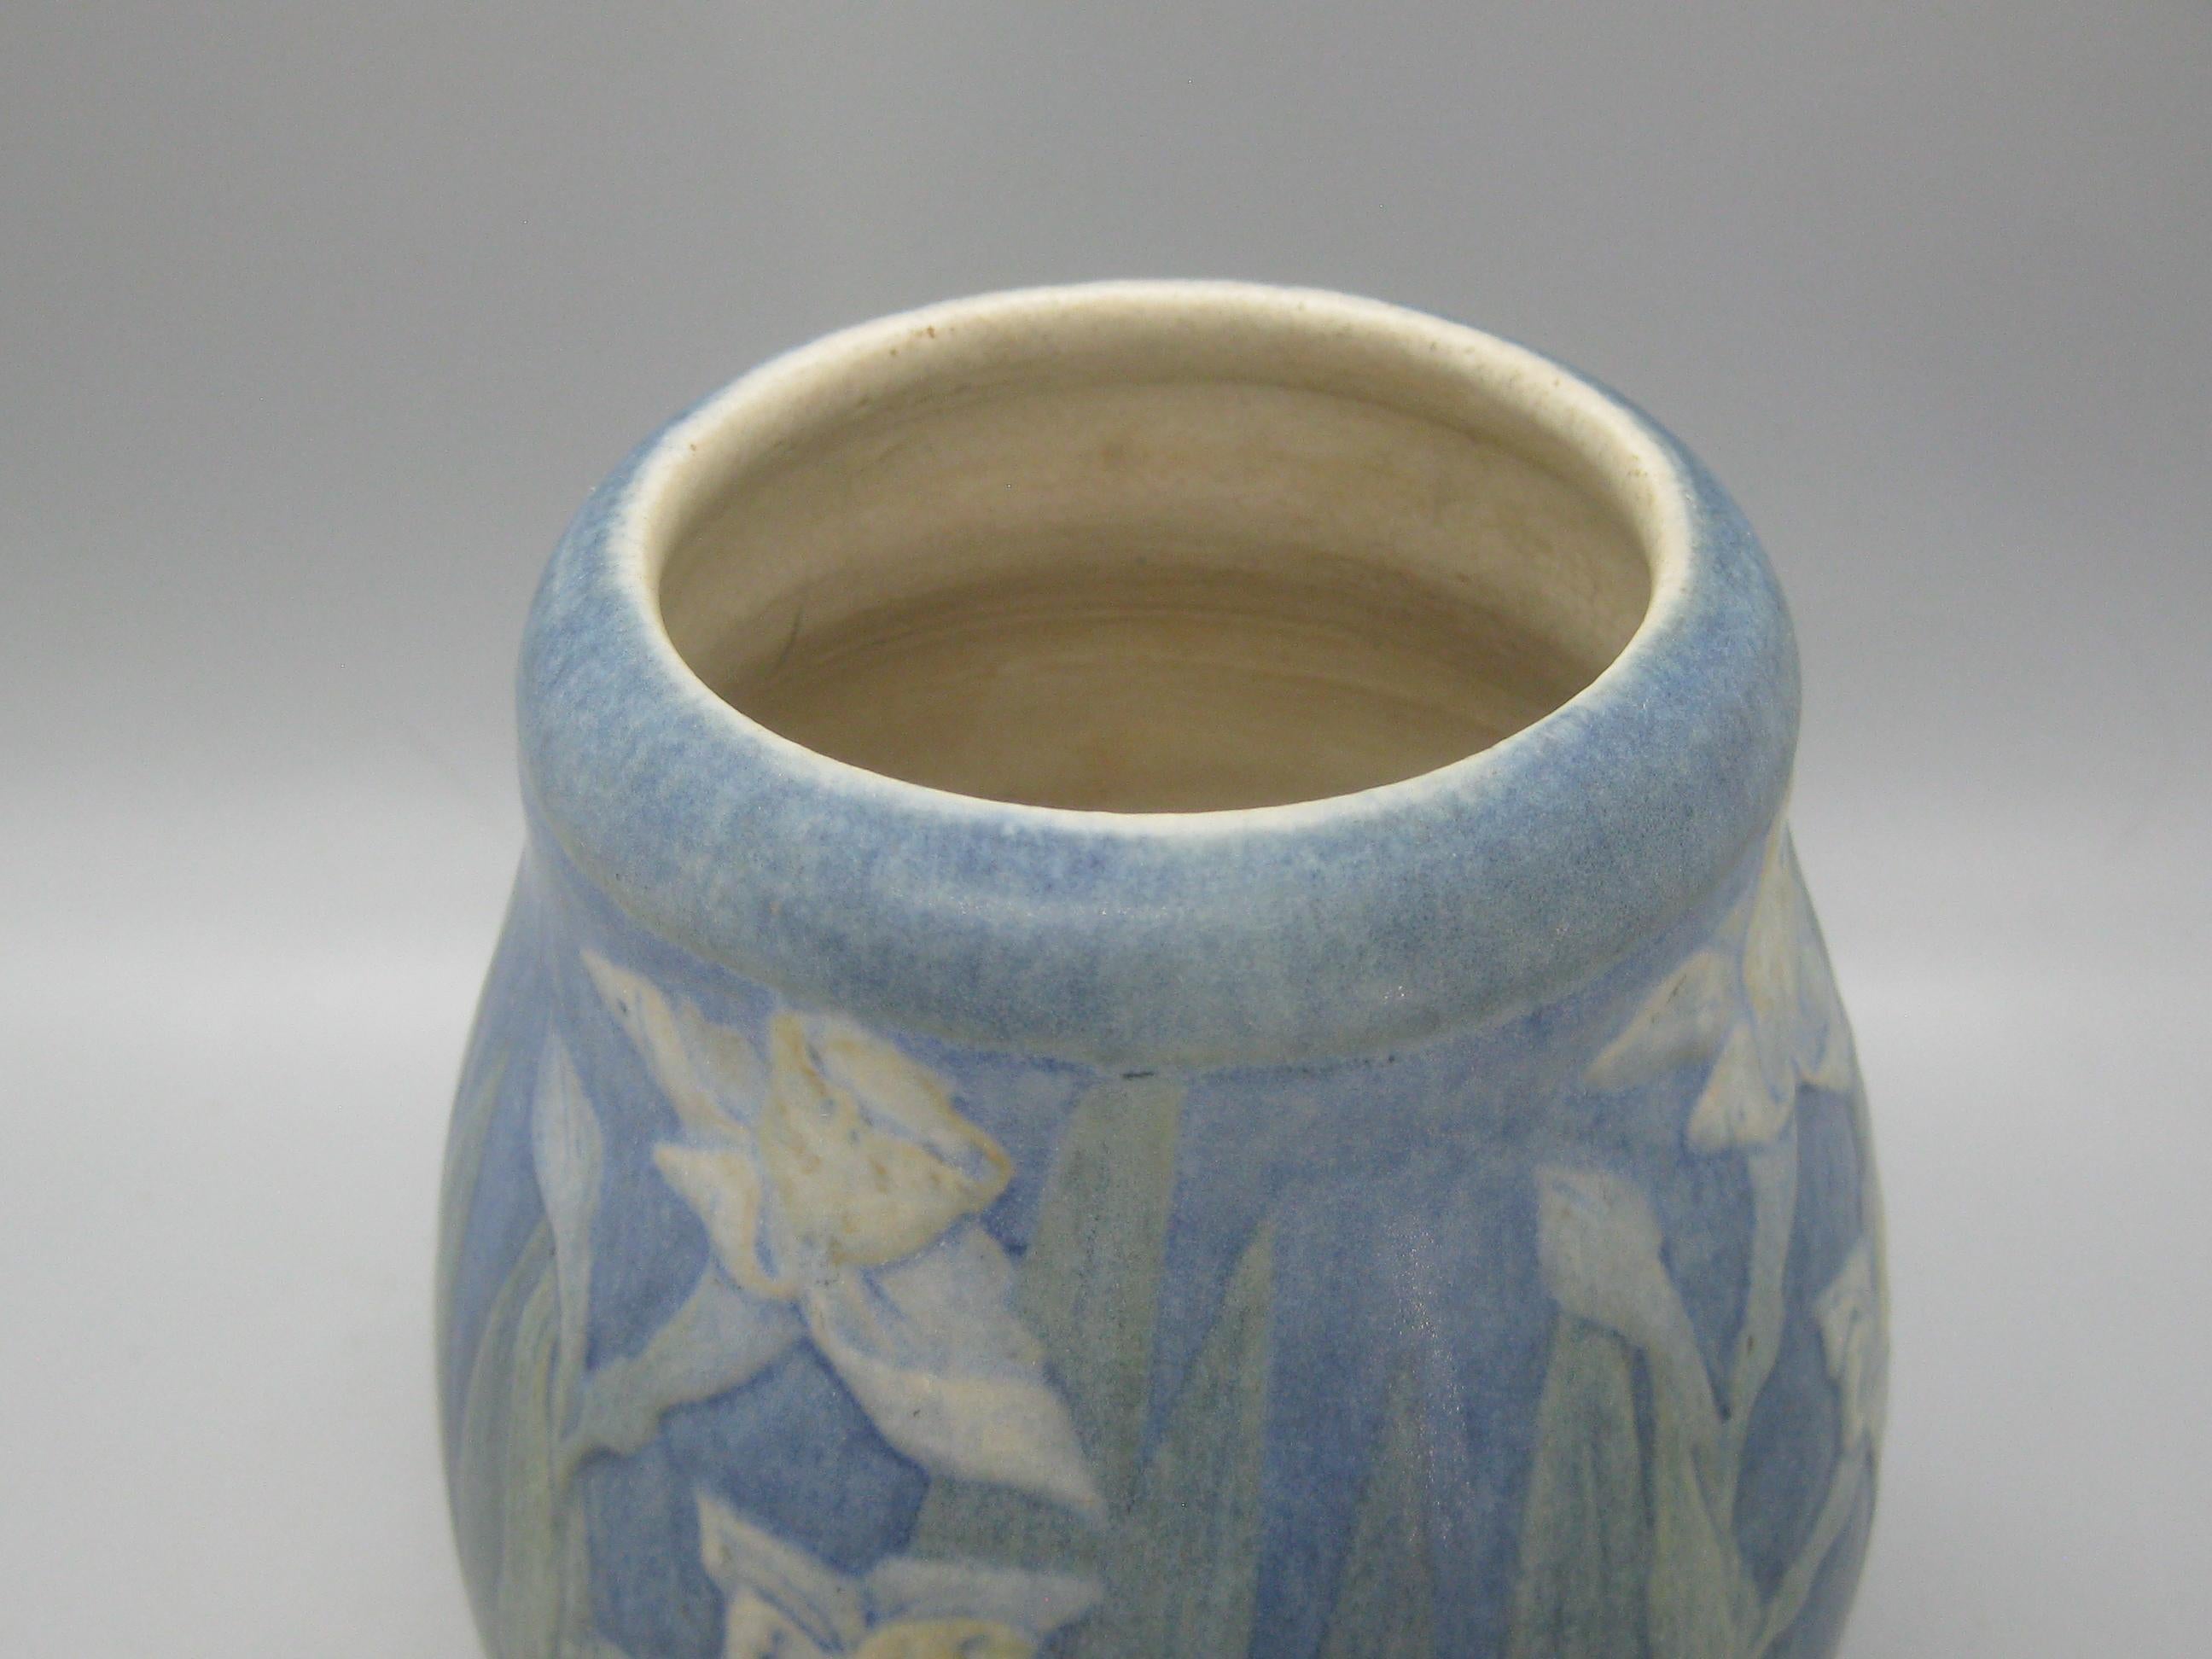 newcomb pottery for sale